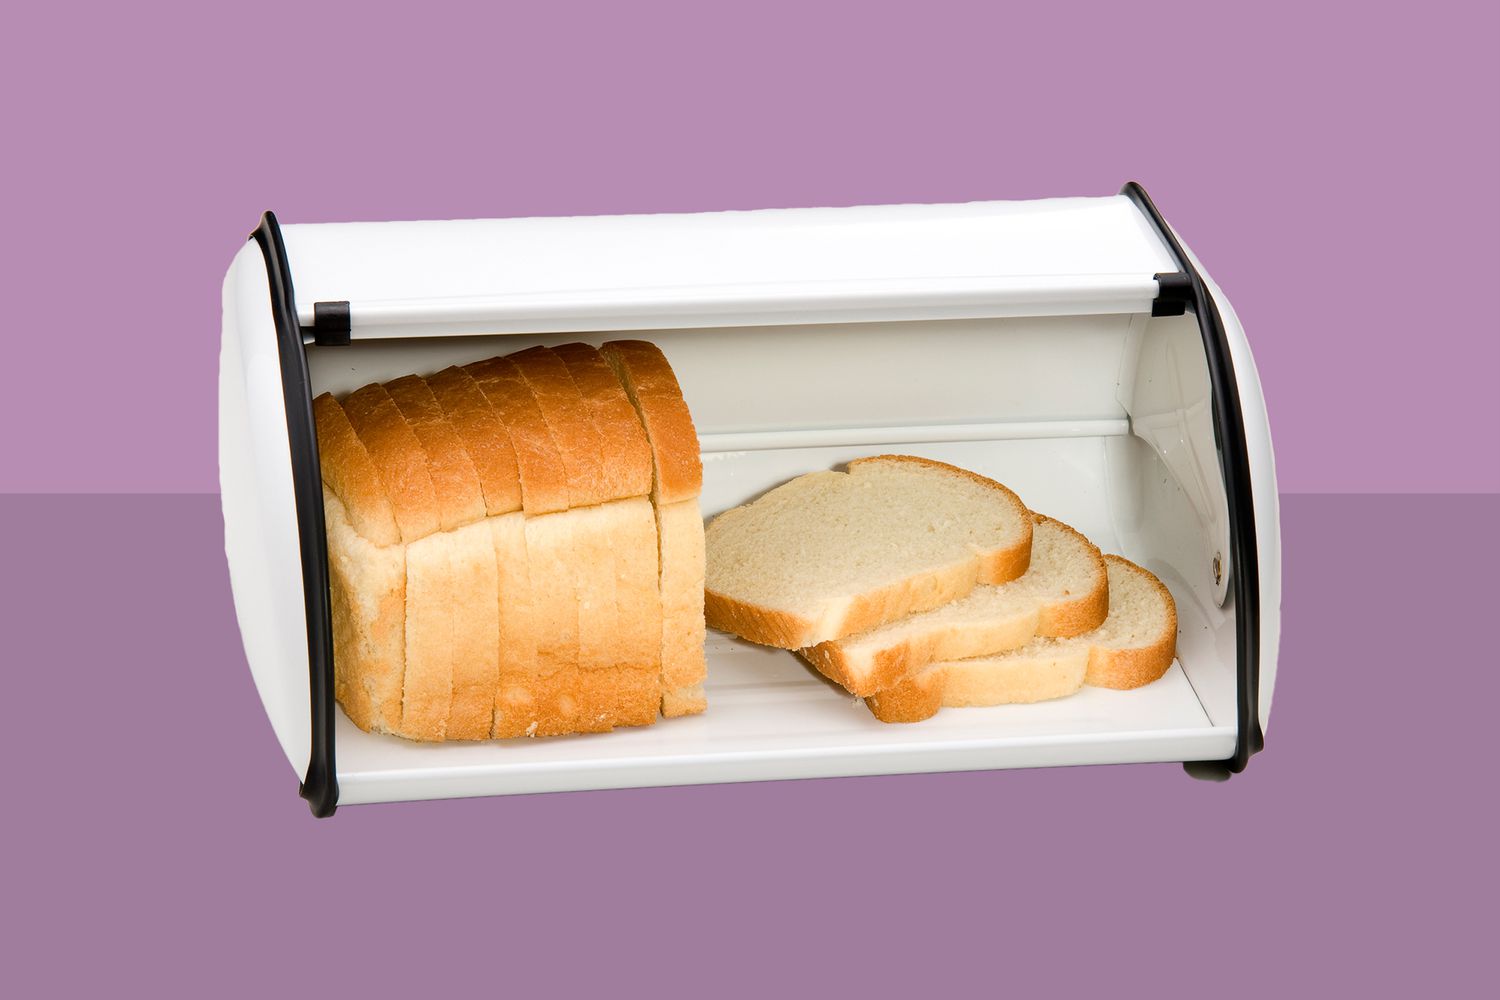 How To Store A Loaf Of Bread